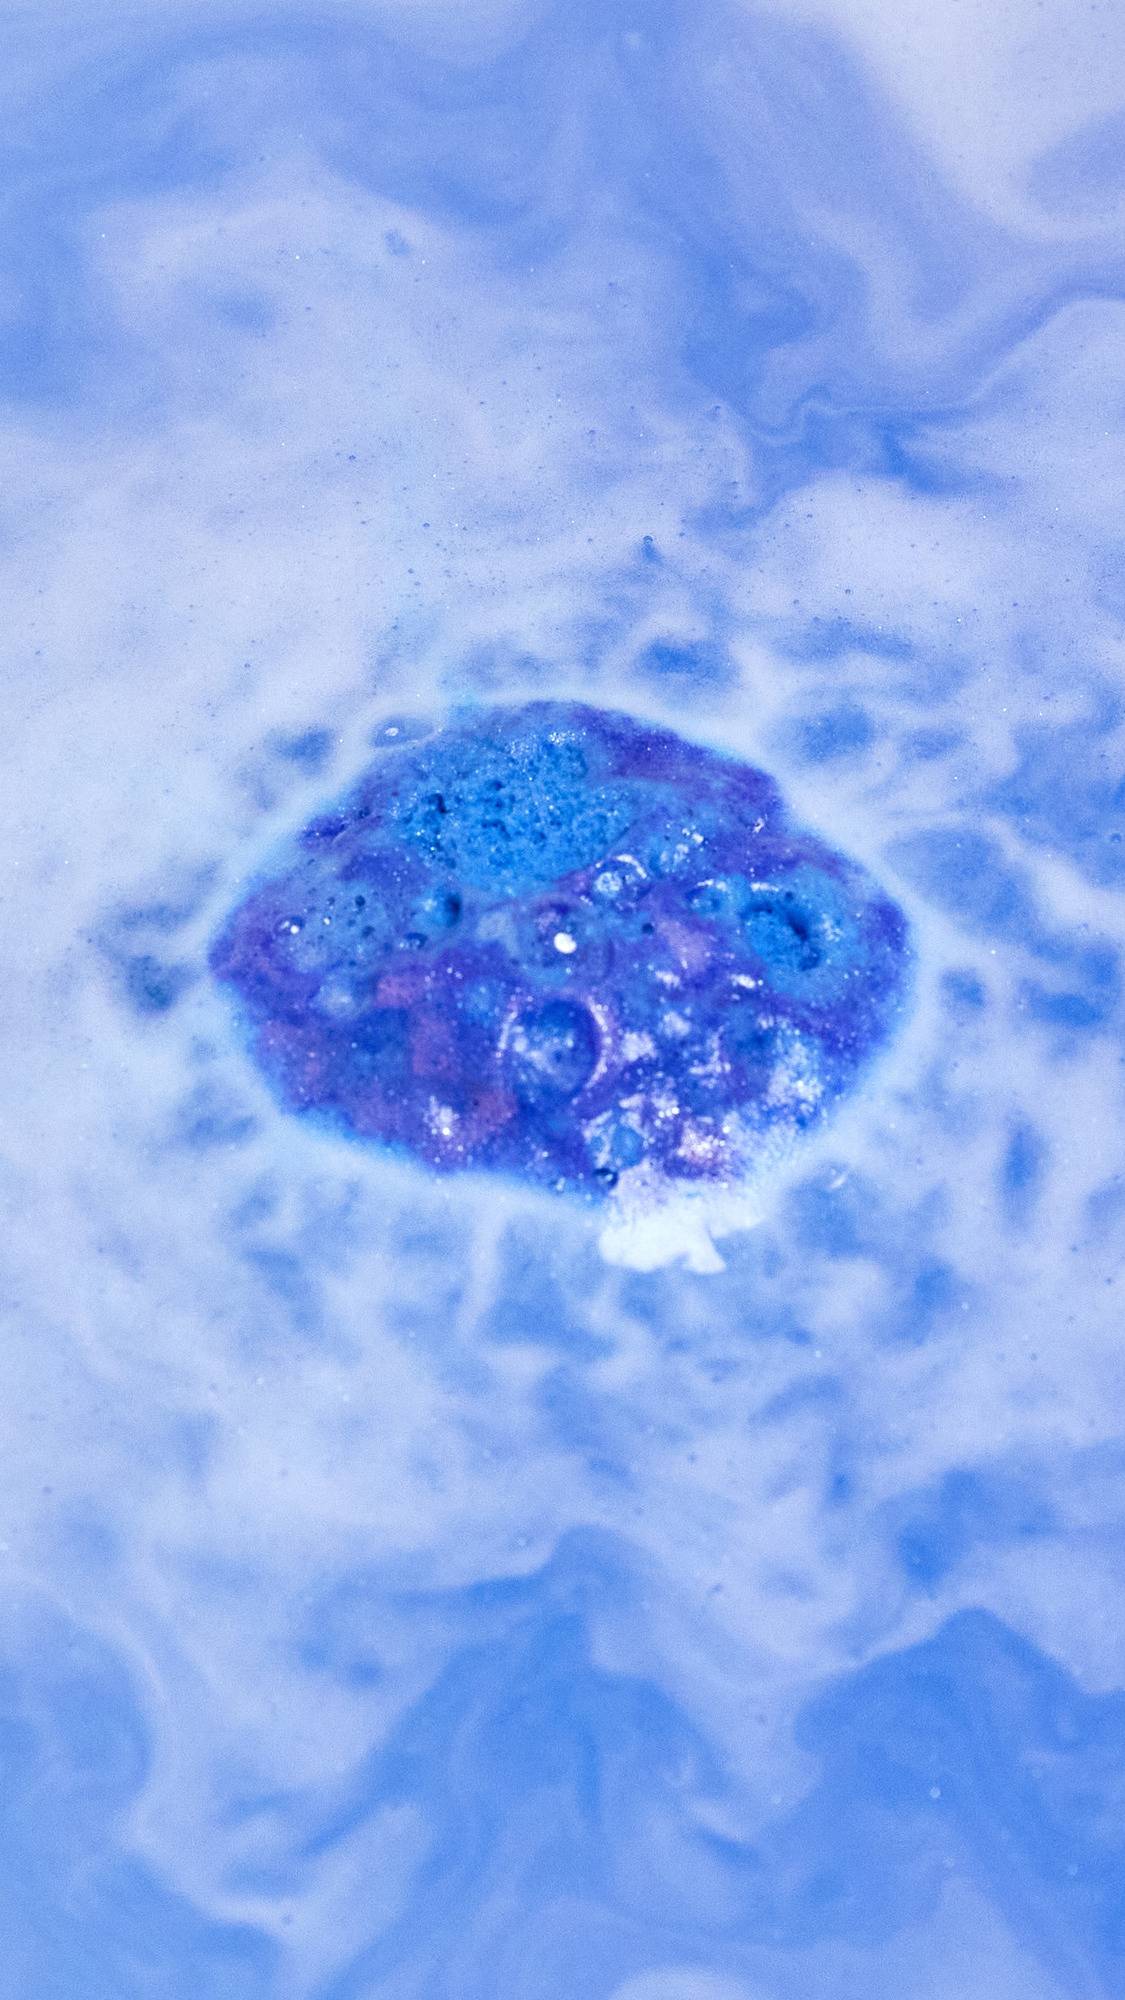 The Brother Moon bath bomb is slowly dissolving in the bath water as it starts to give off subtle purple and blue foam laced with silver sparkles. 